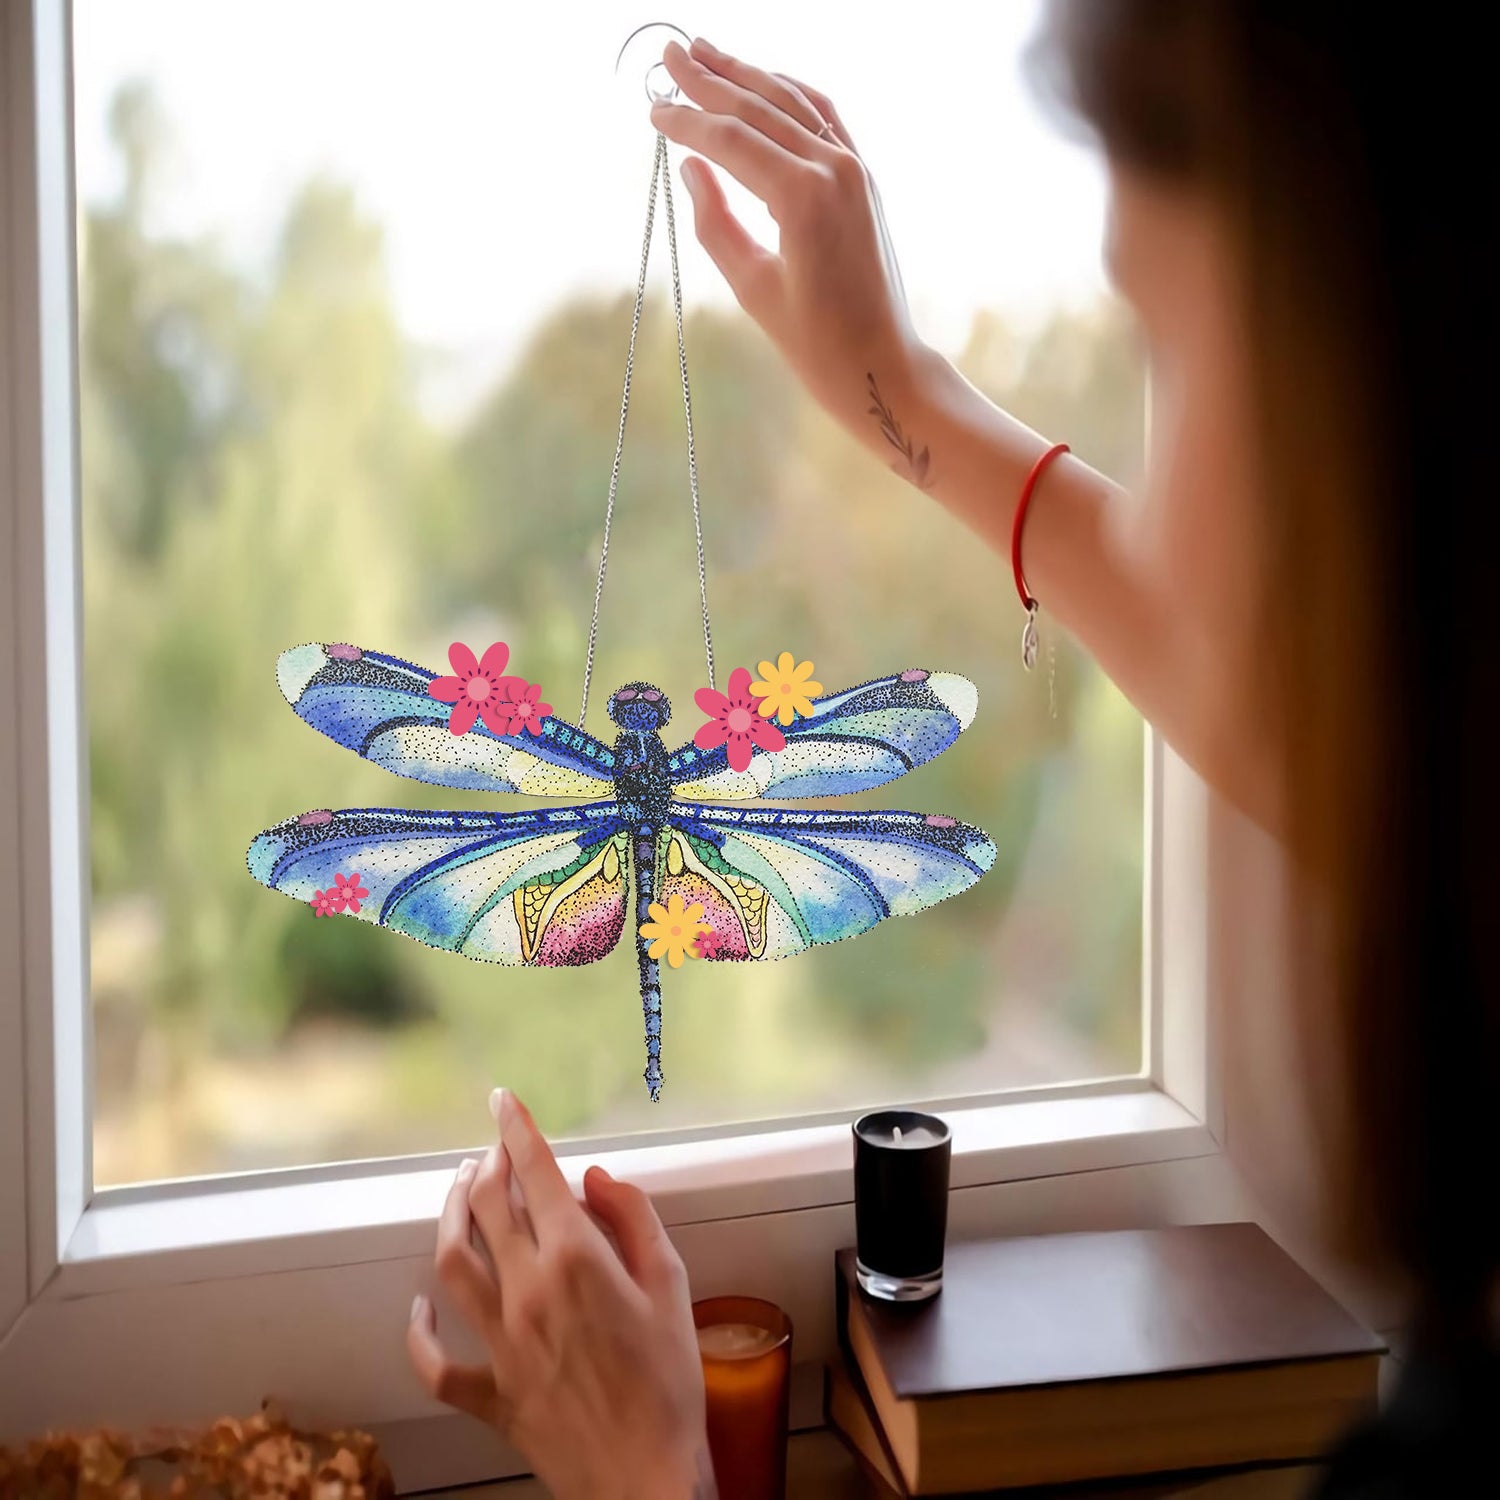 Nsect Dragonfly 2021 Window Mica Decor Home Decoration